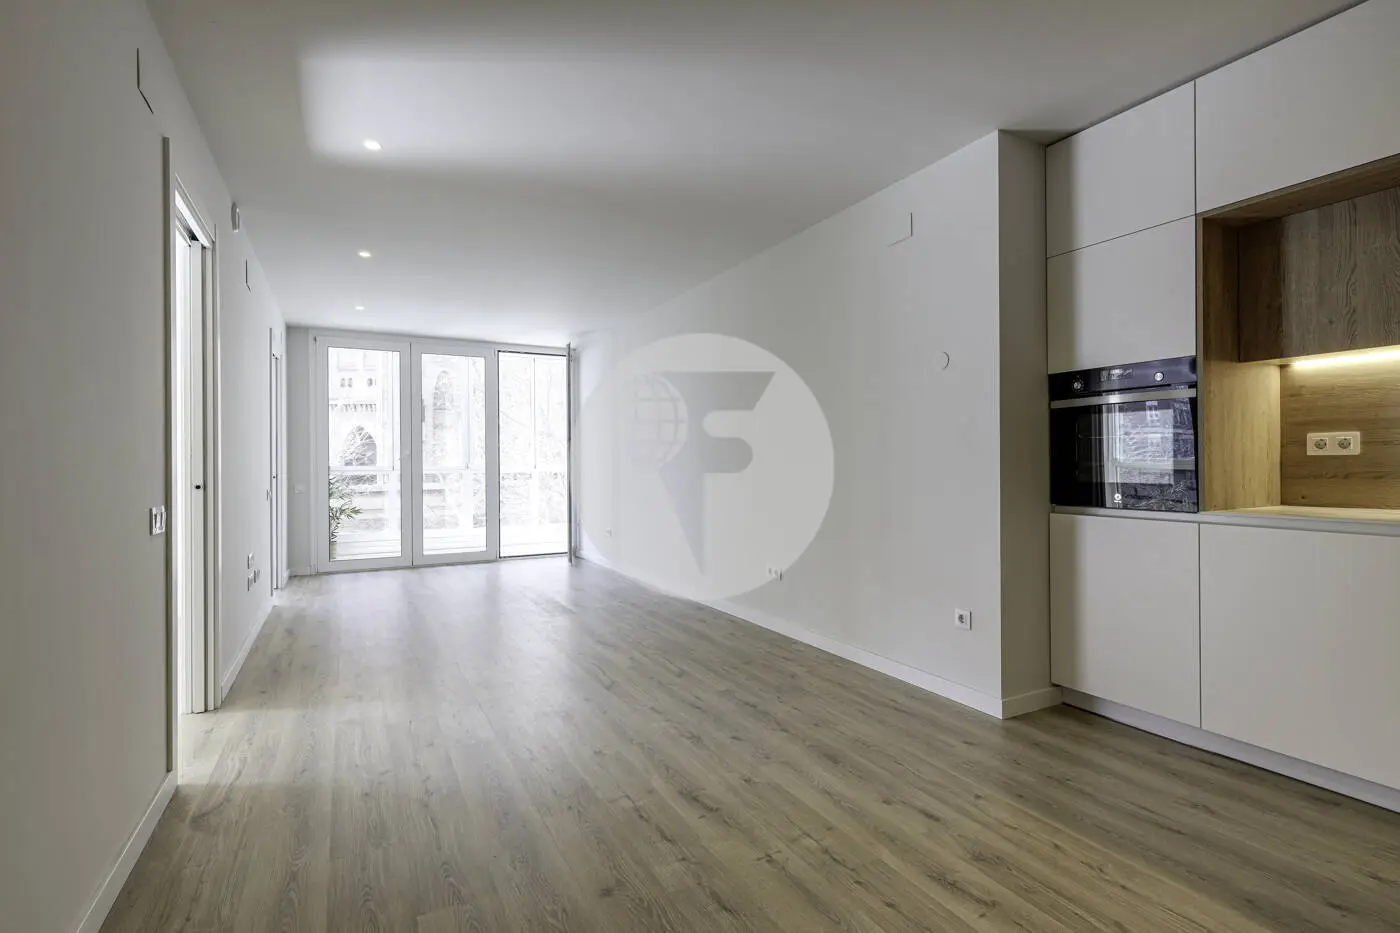 Apartment with three bedrooms and 2 bathrooms completely renovated, brand new 3